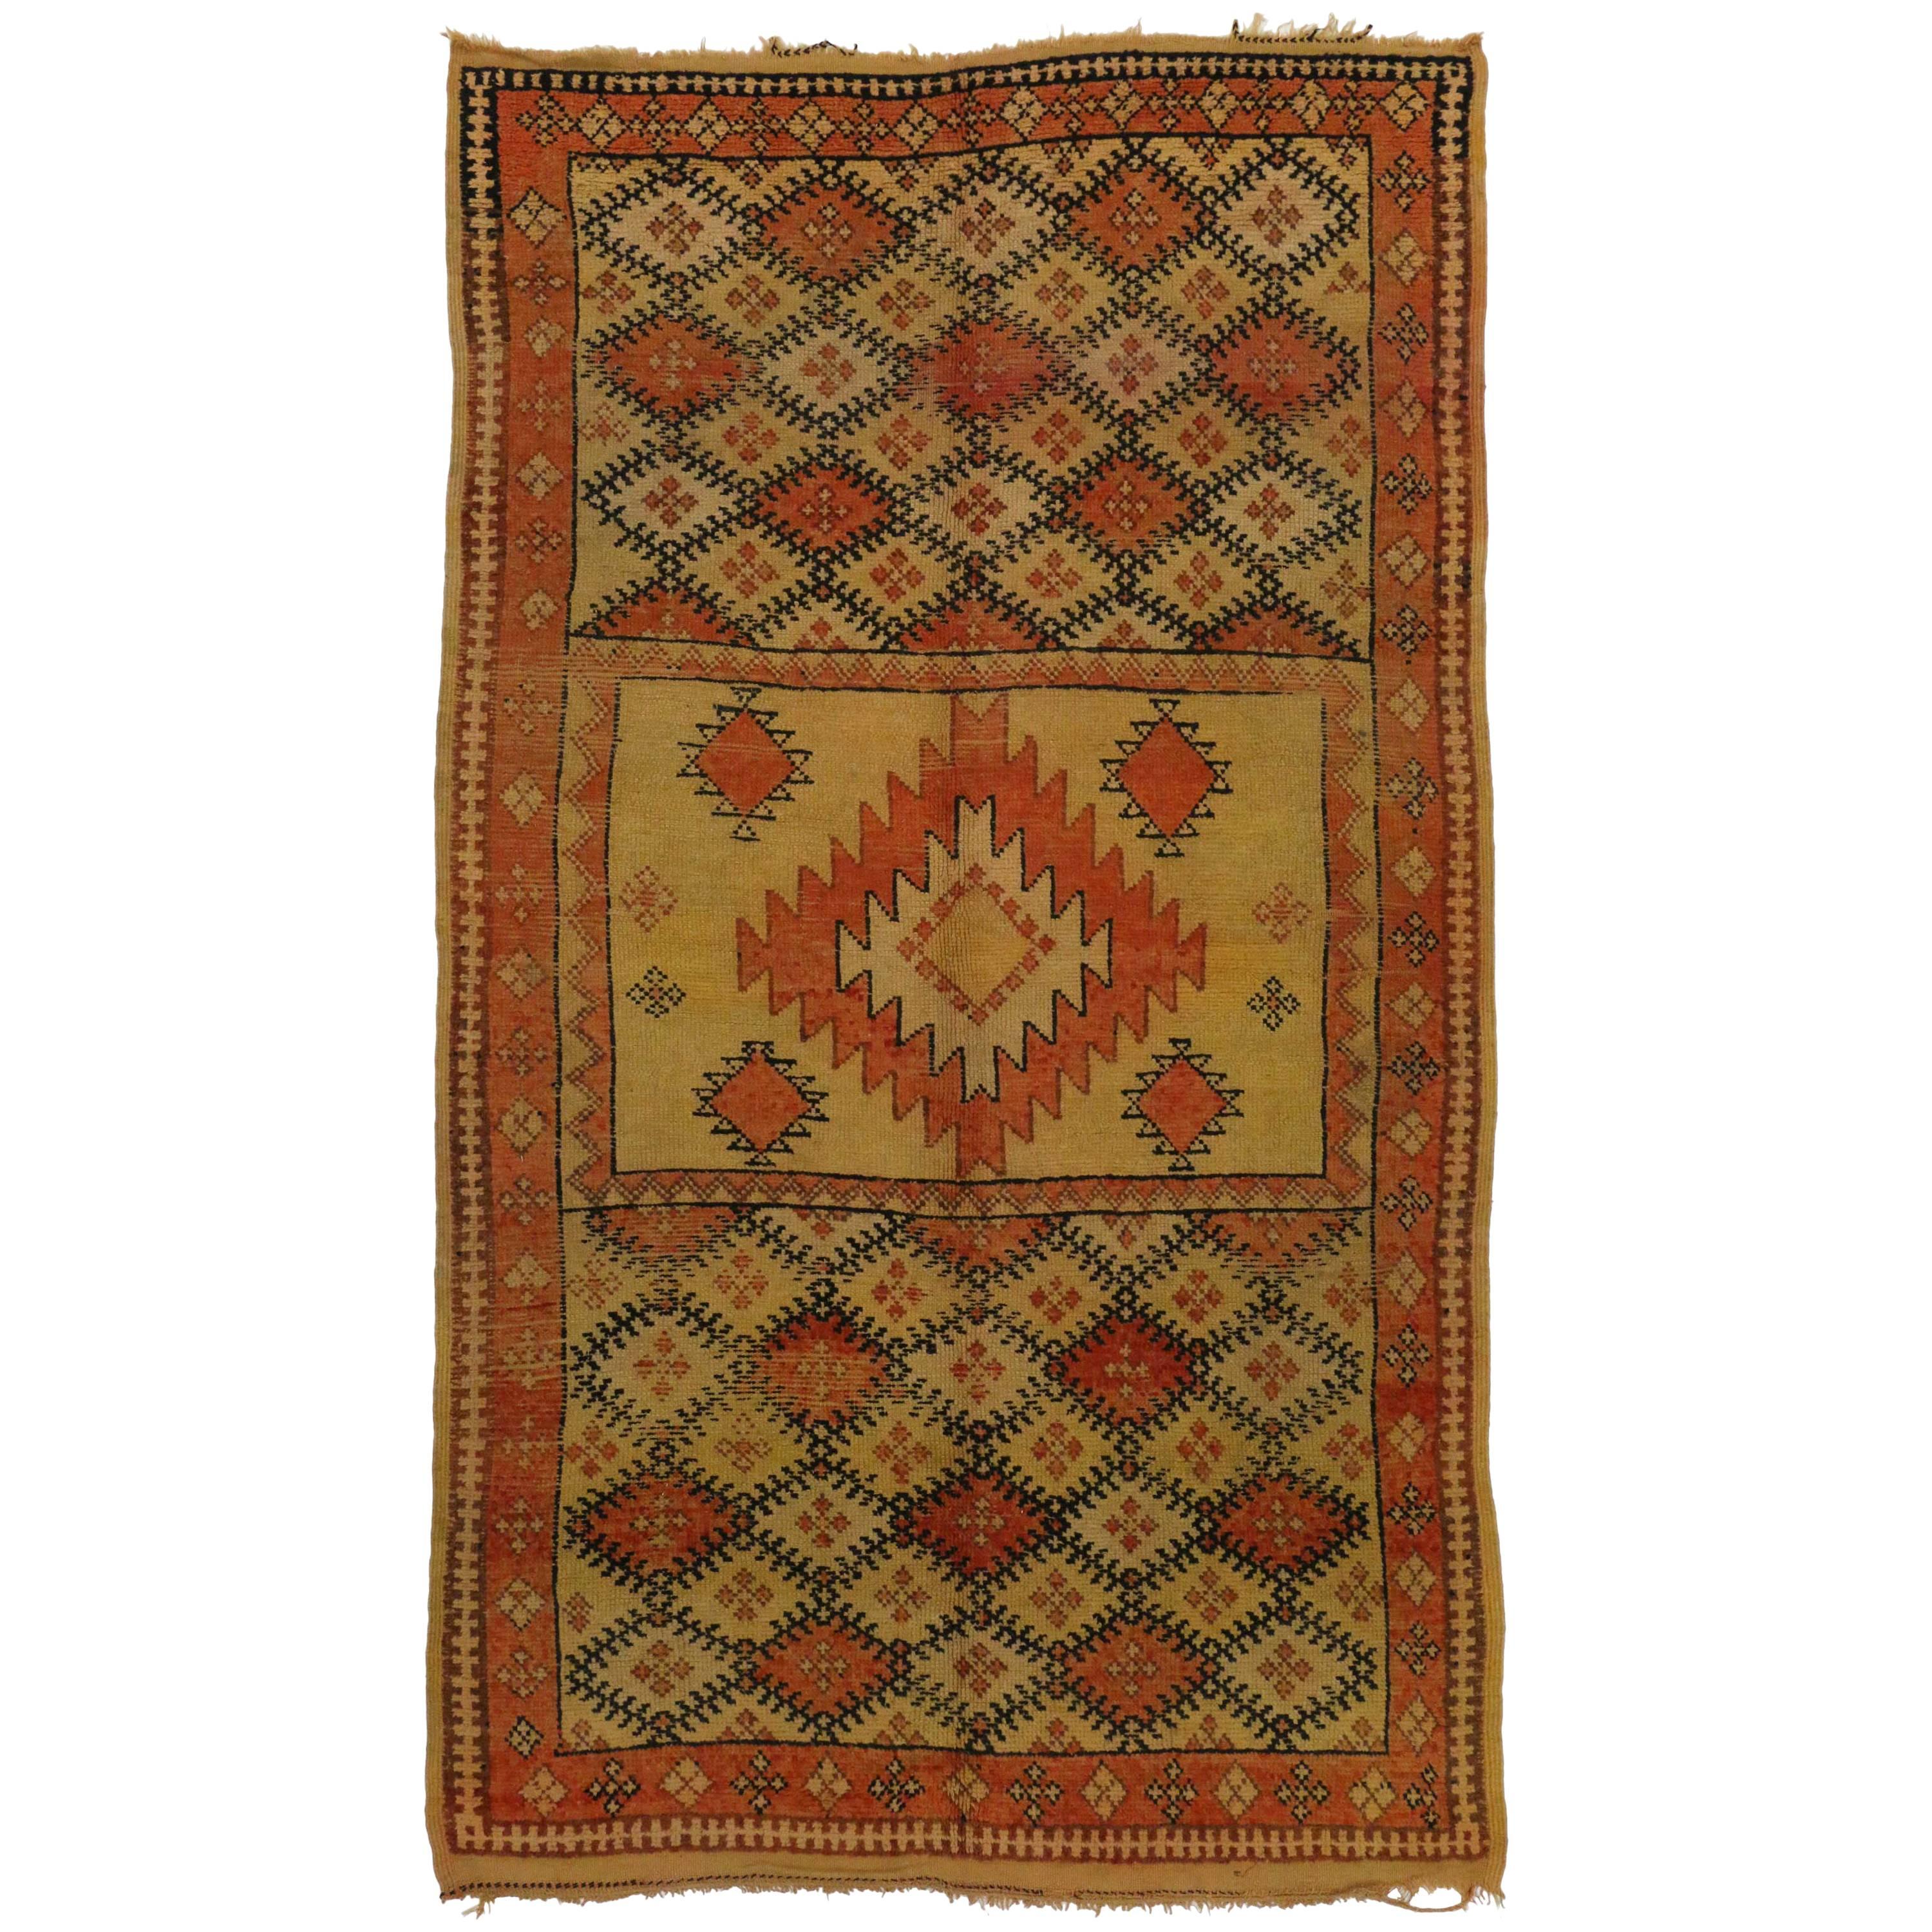 Berber Moroccan Rug with Tribal Design and Modern Style